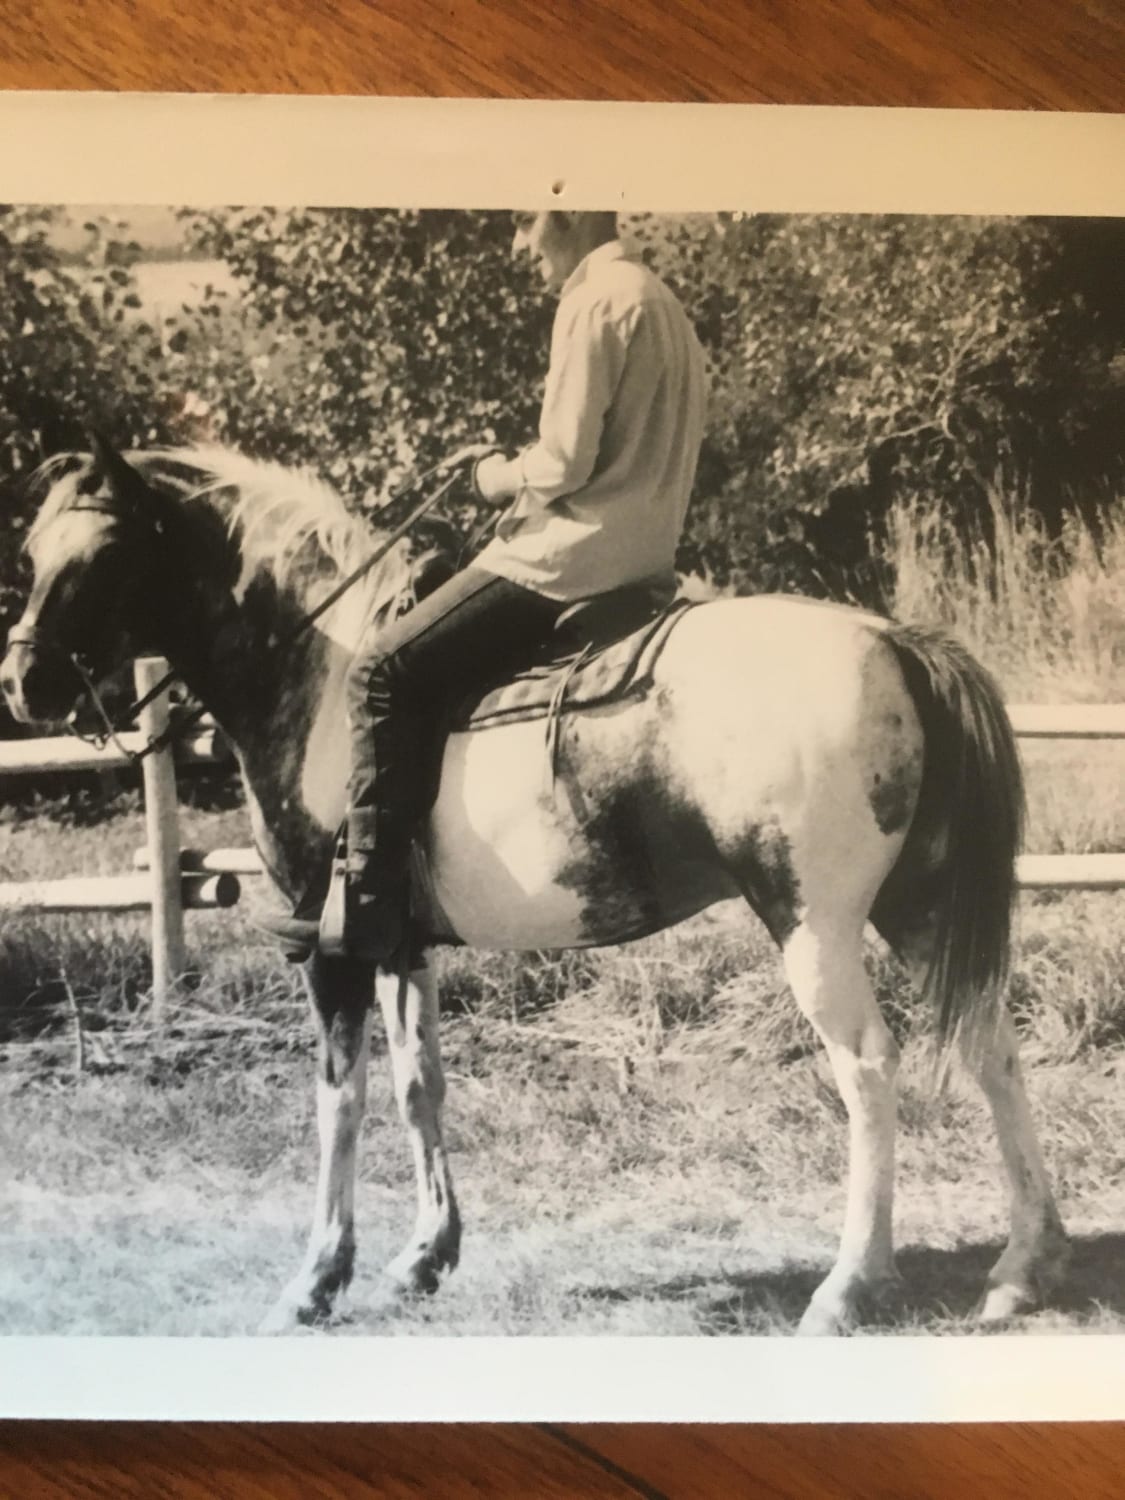 August 26, 1969. Day before our wedding. Prince, my pintaloosa pony and a teen-aged soon to be brother in law